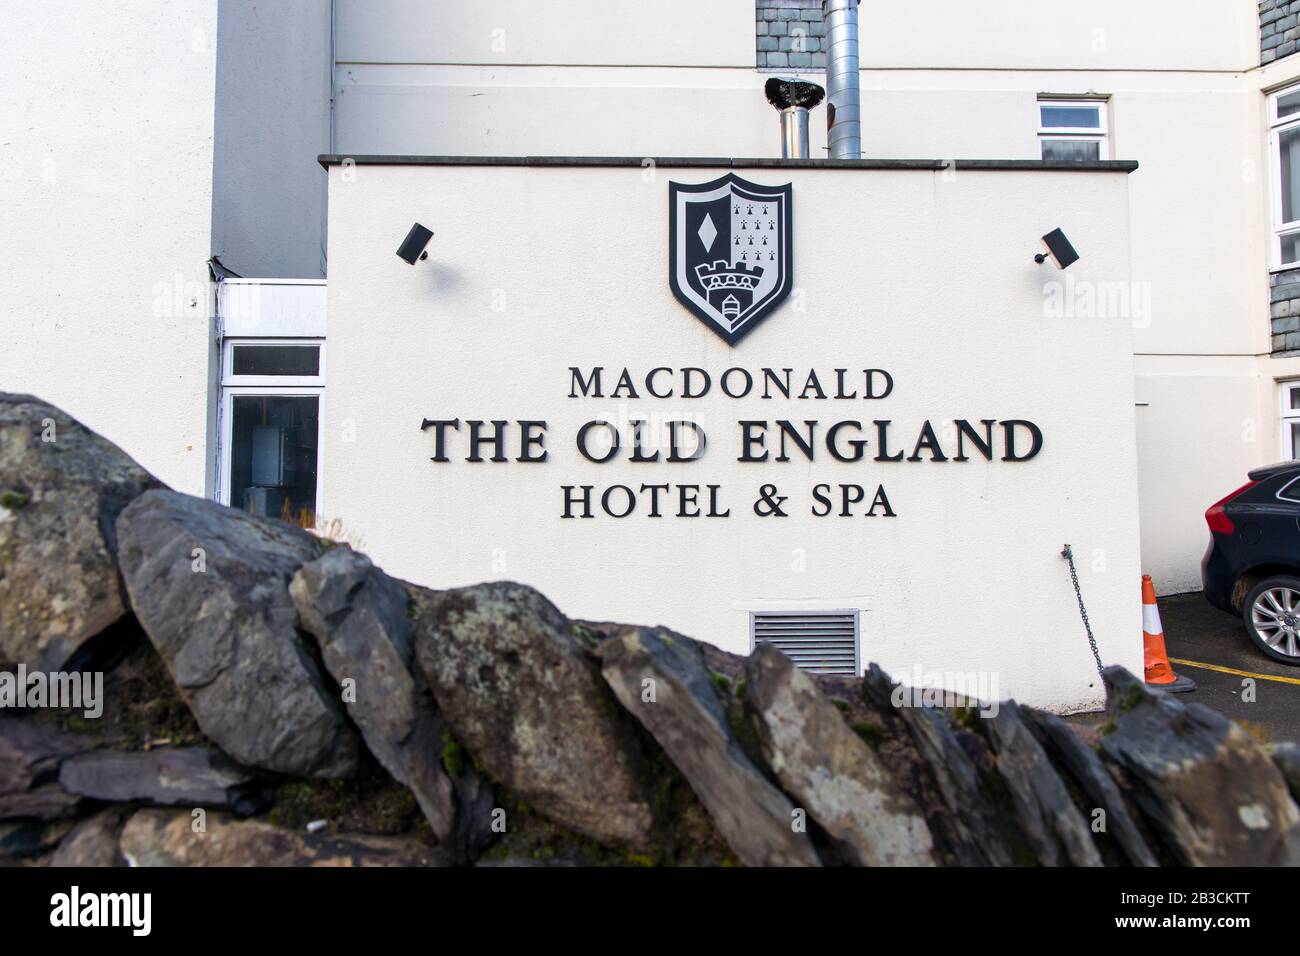 MacDonald, The Old England Hotel & Spa, Bowness-on-Windermere, Lake District, England Stockfoto